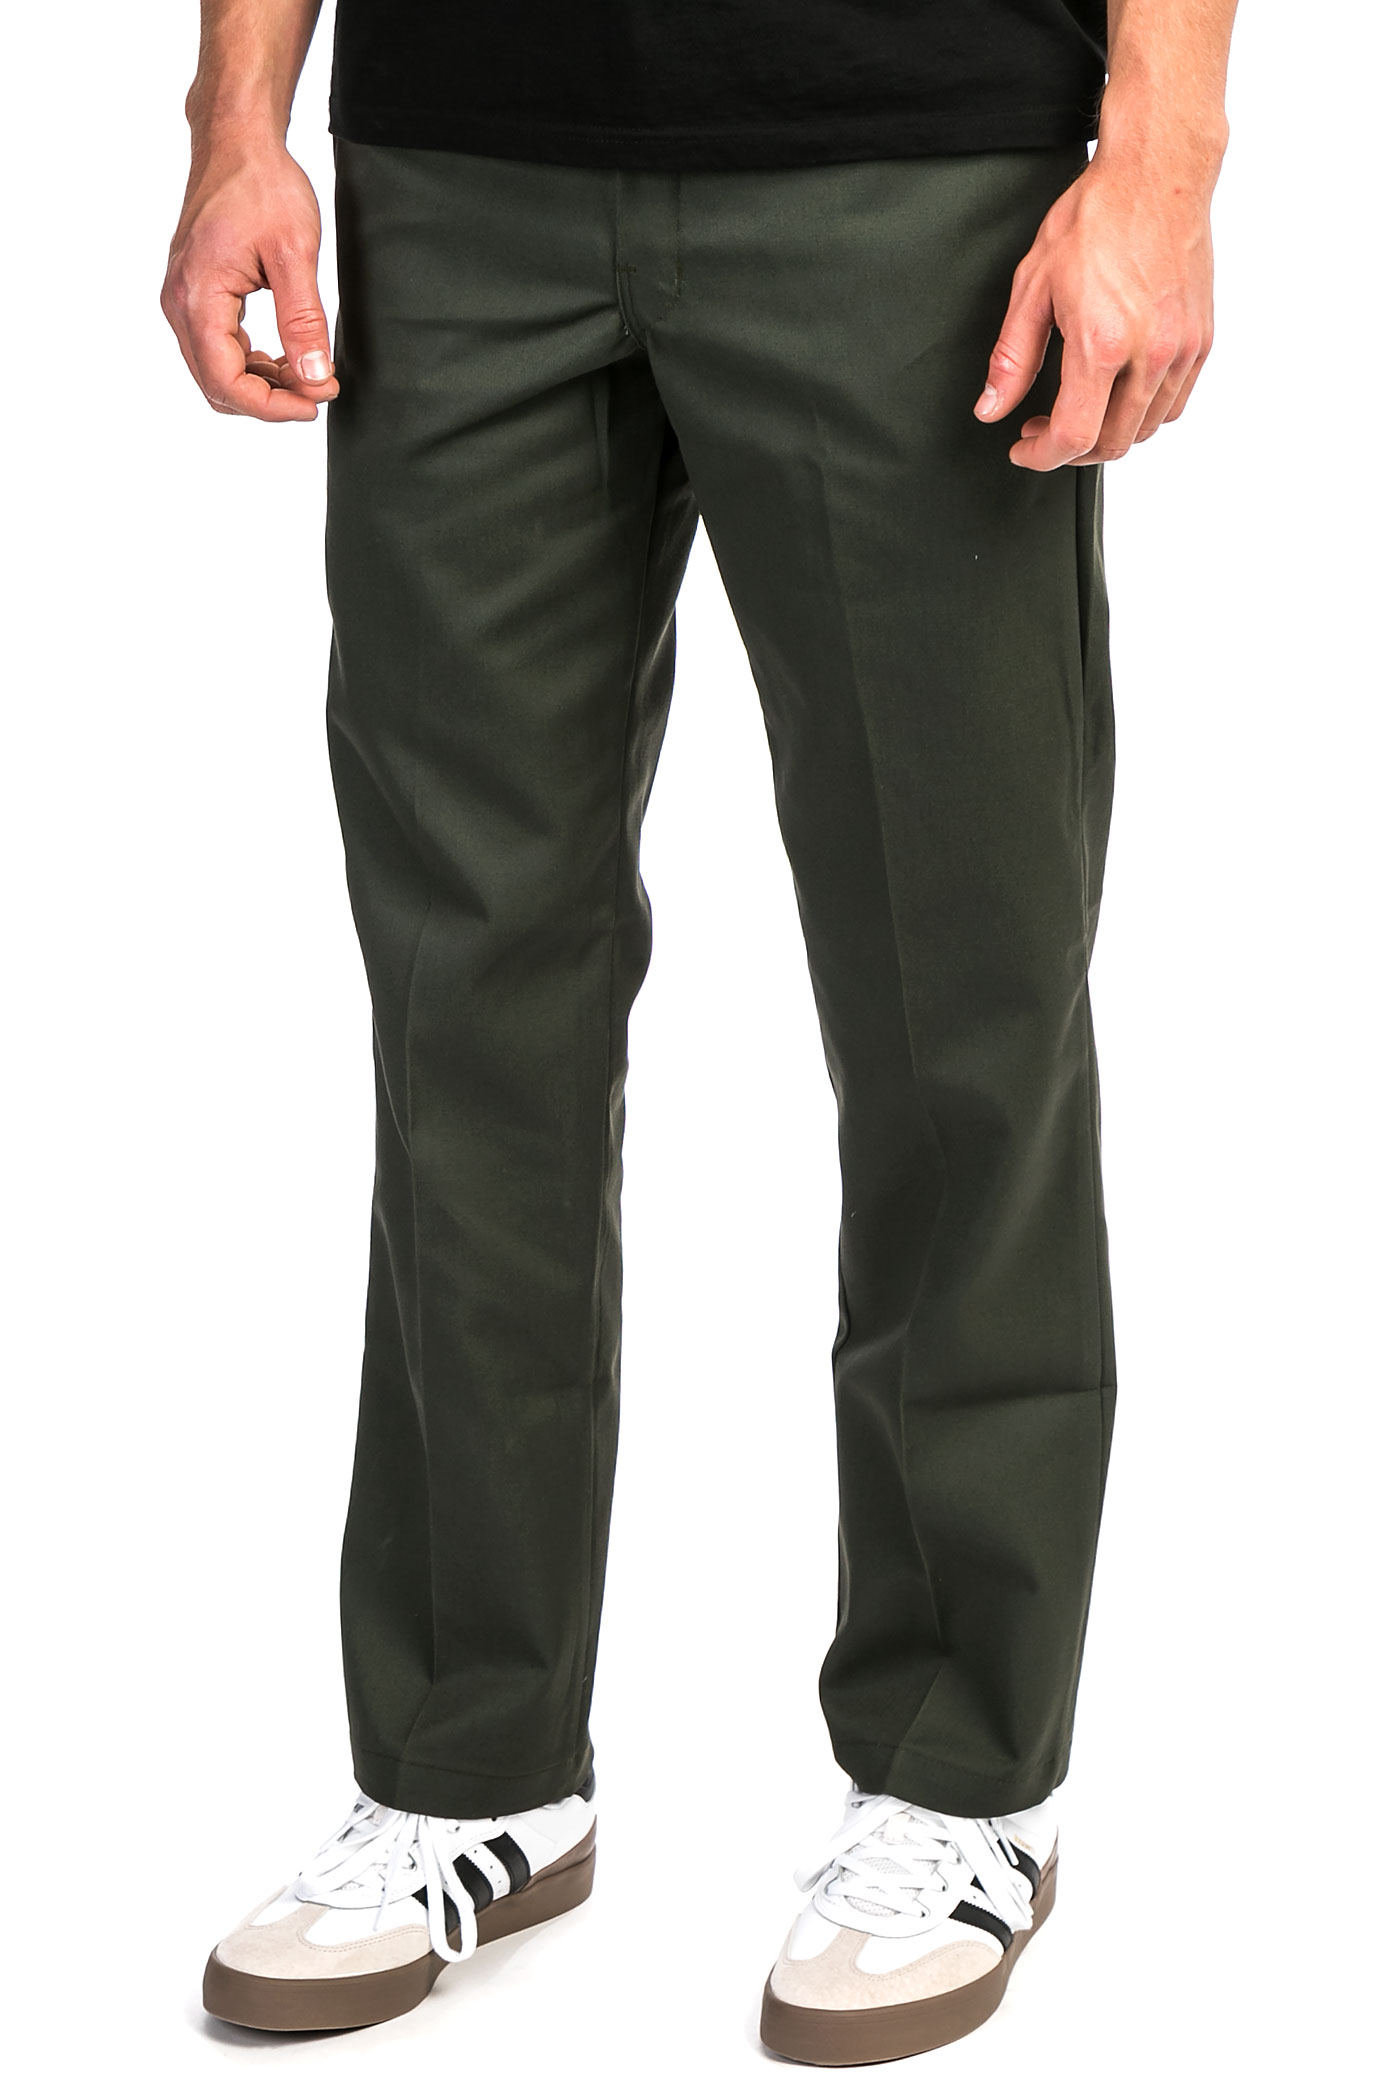 Dickies O-Dog 874 Workpant Hose (olive green) kaufen bei skatedeluxe